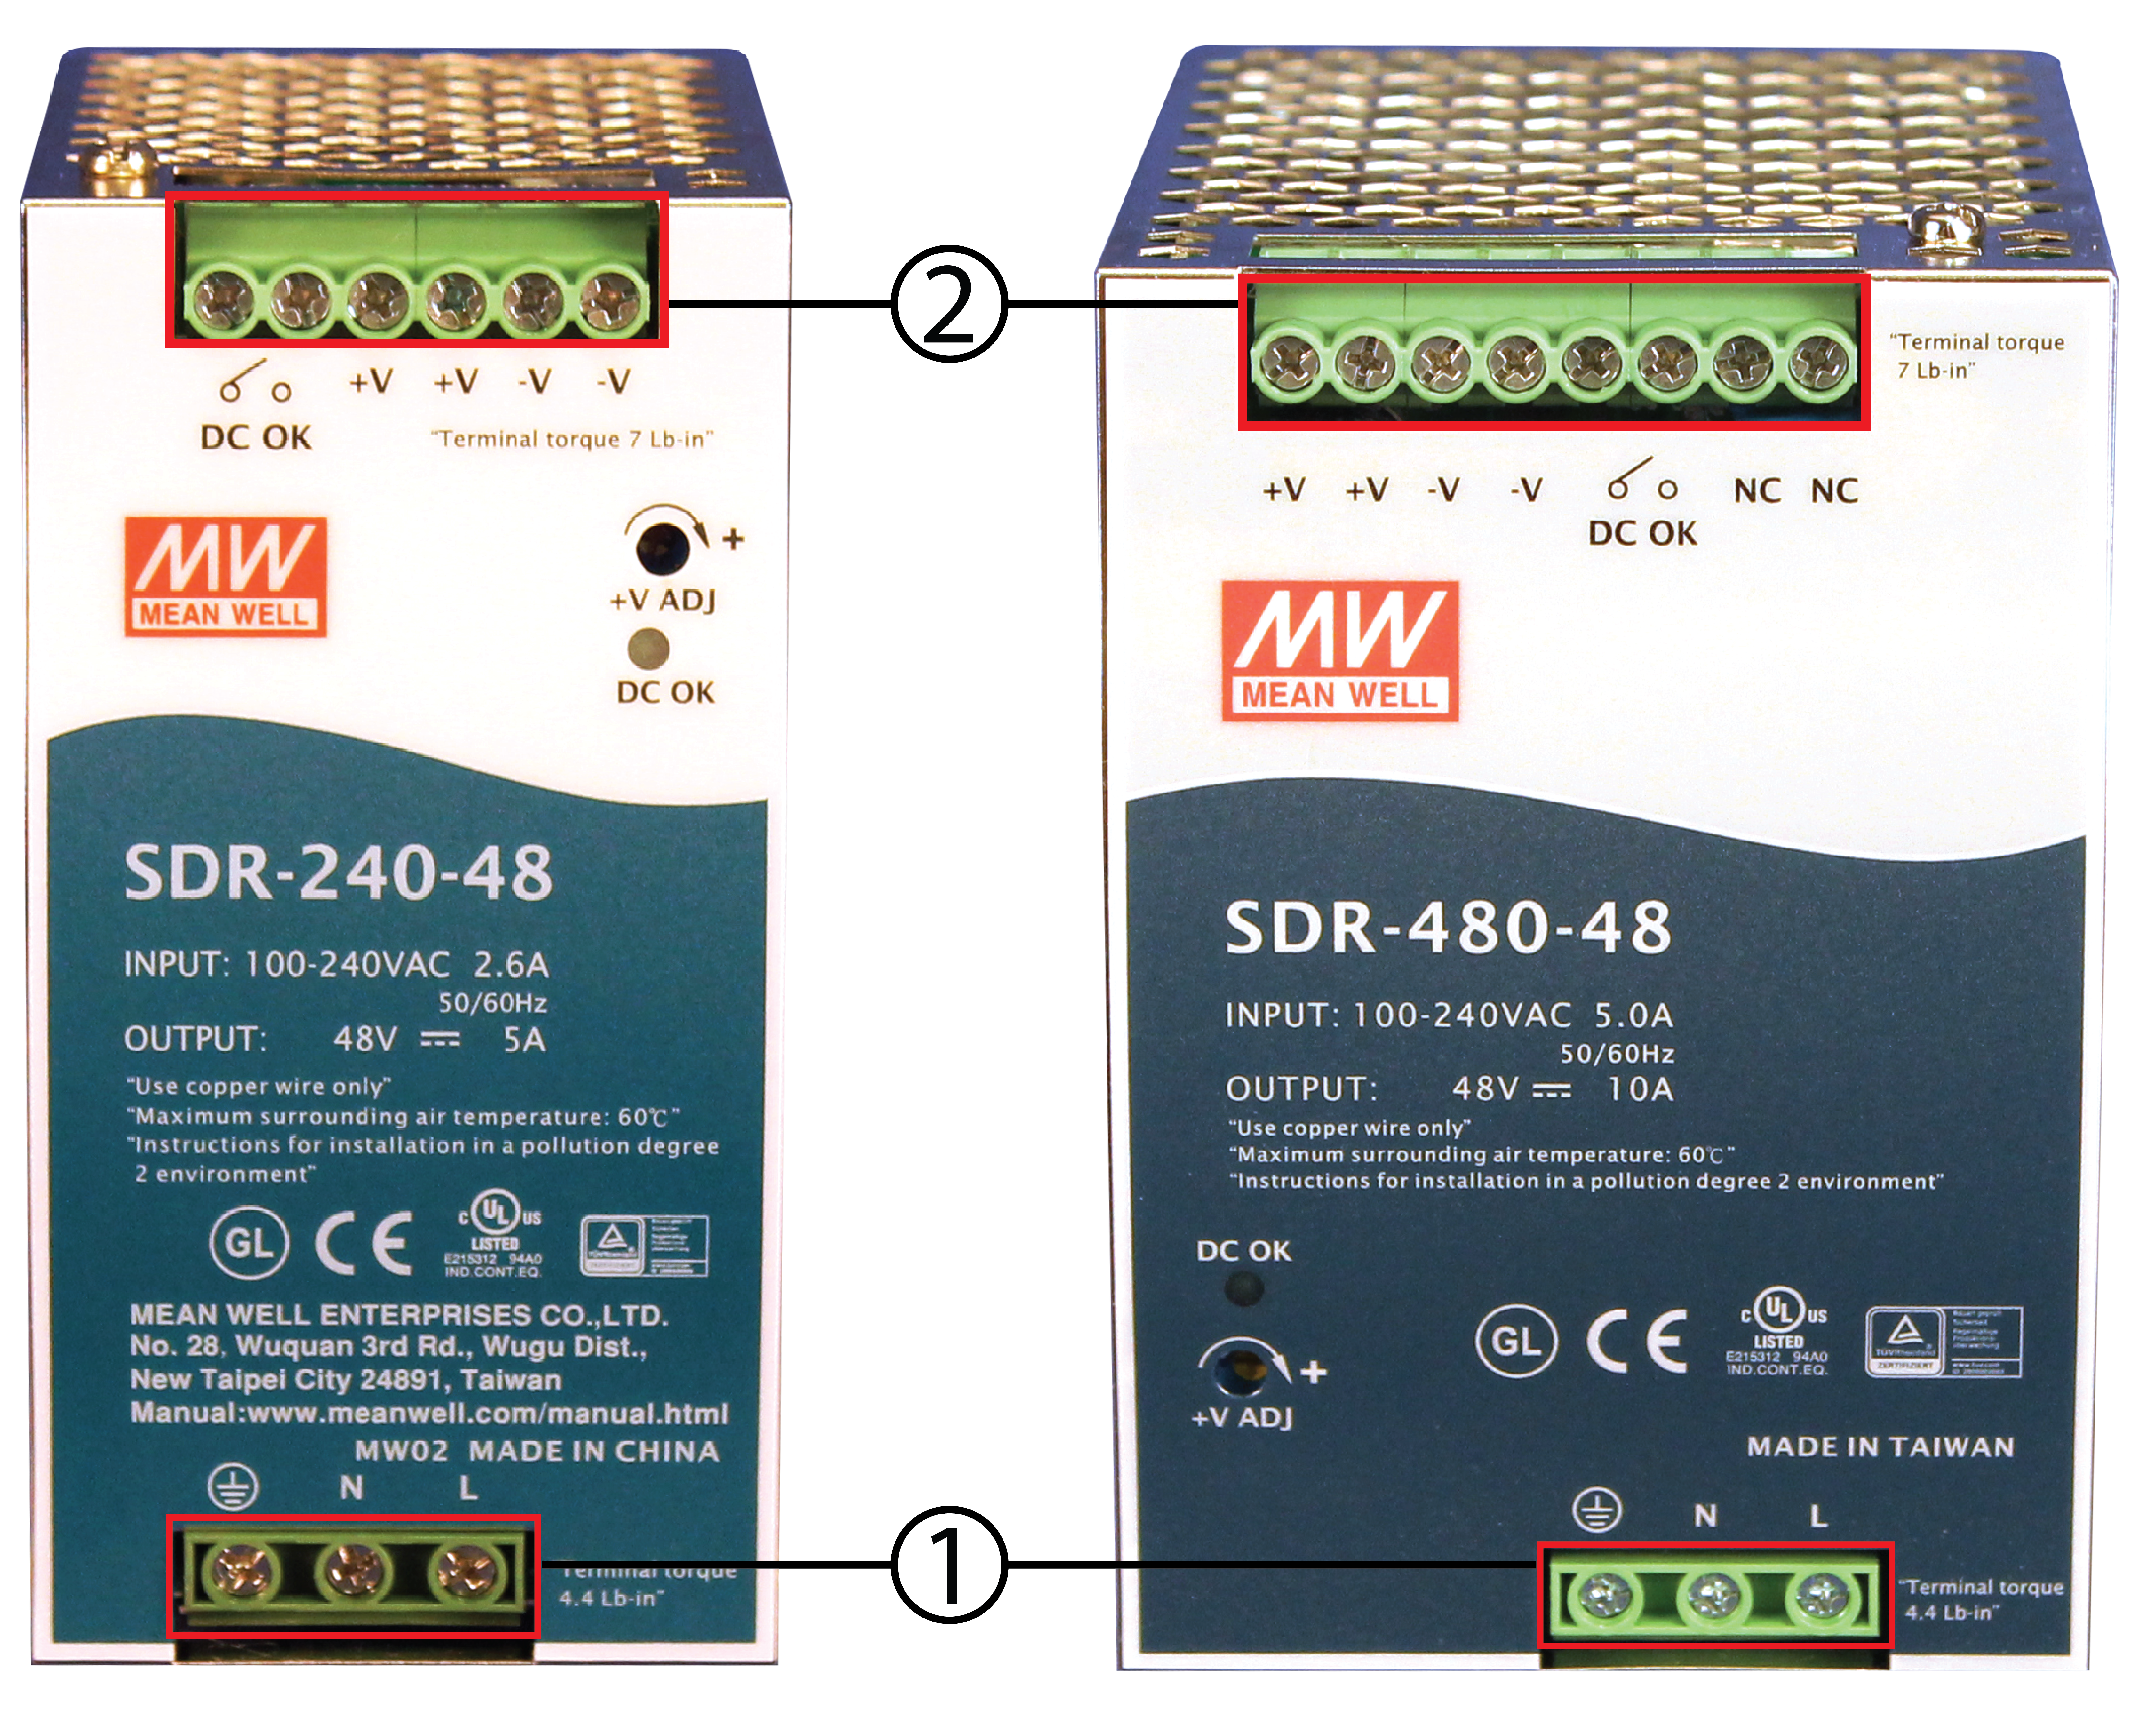 Power Supply AC and DC inputs